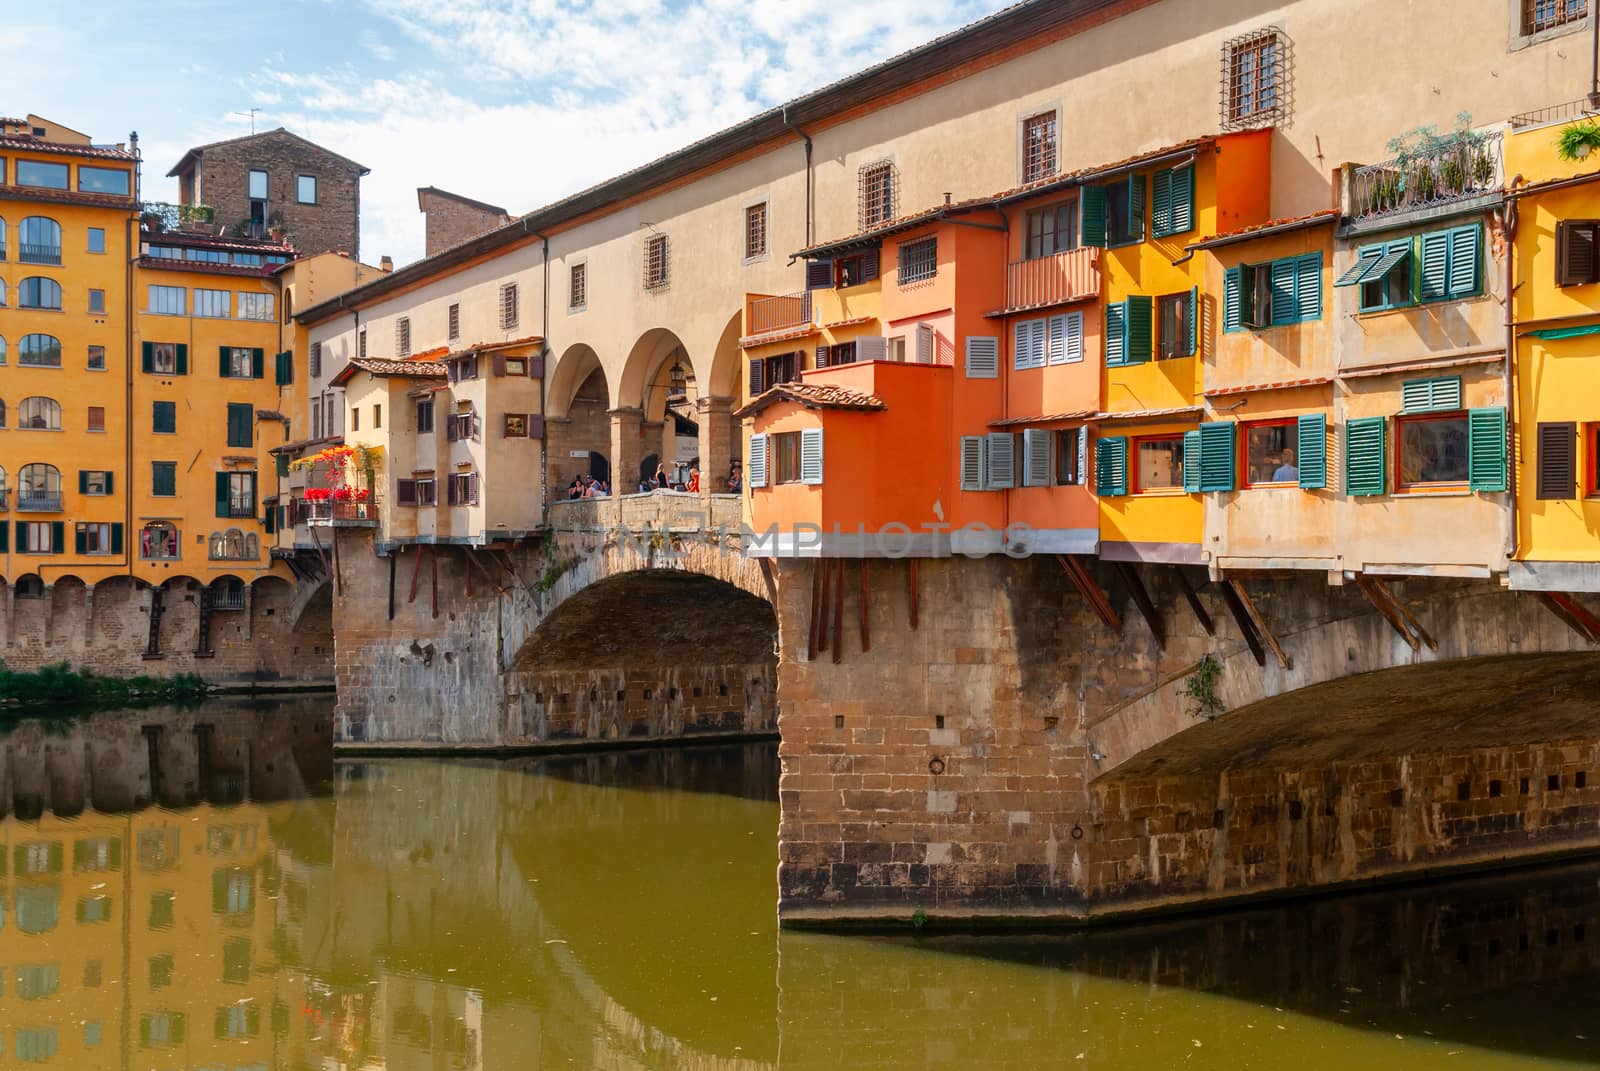 Details of the famous Old Bridge in Florence Ponte Vecchio, Italy .